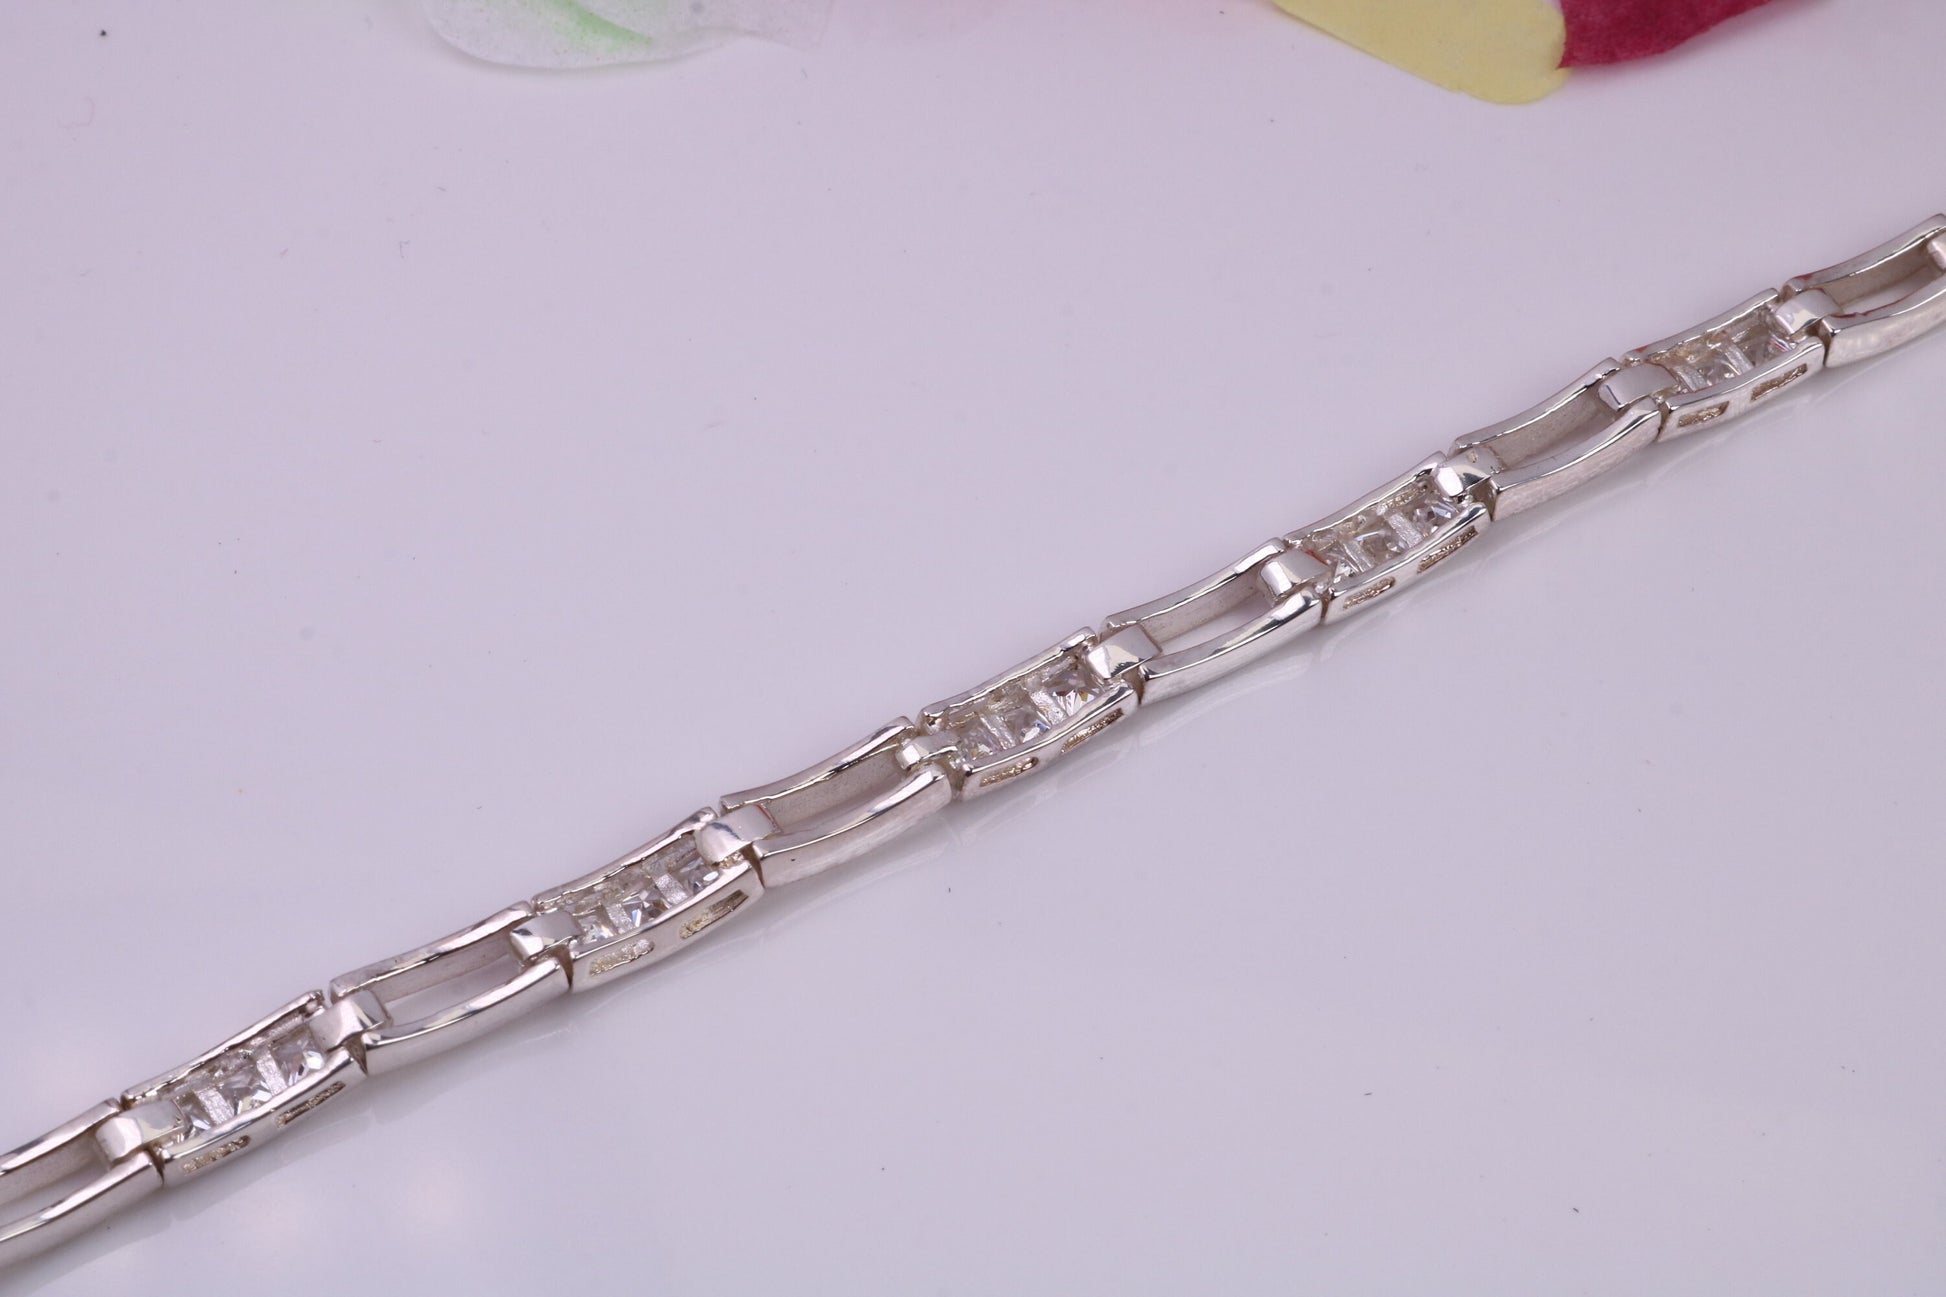 Cubic Zirconia set Tennis Bracelet, made from solid Sterling Silver, Platinum and Diamond Look for a Fraction of the cost